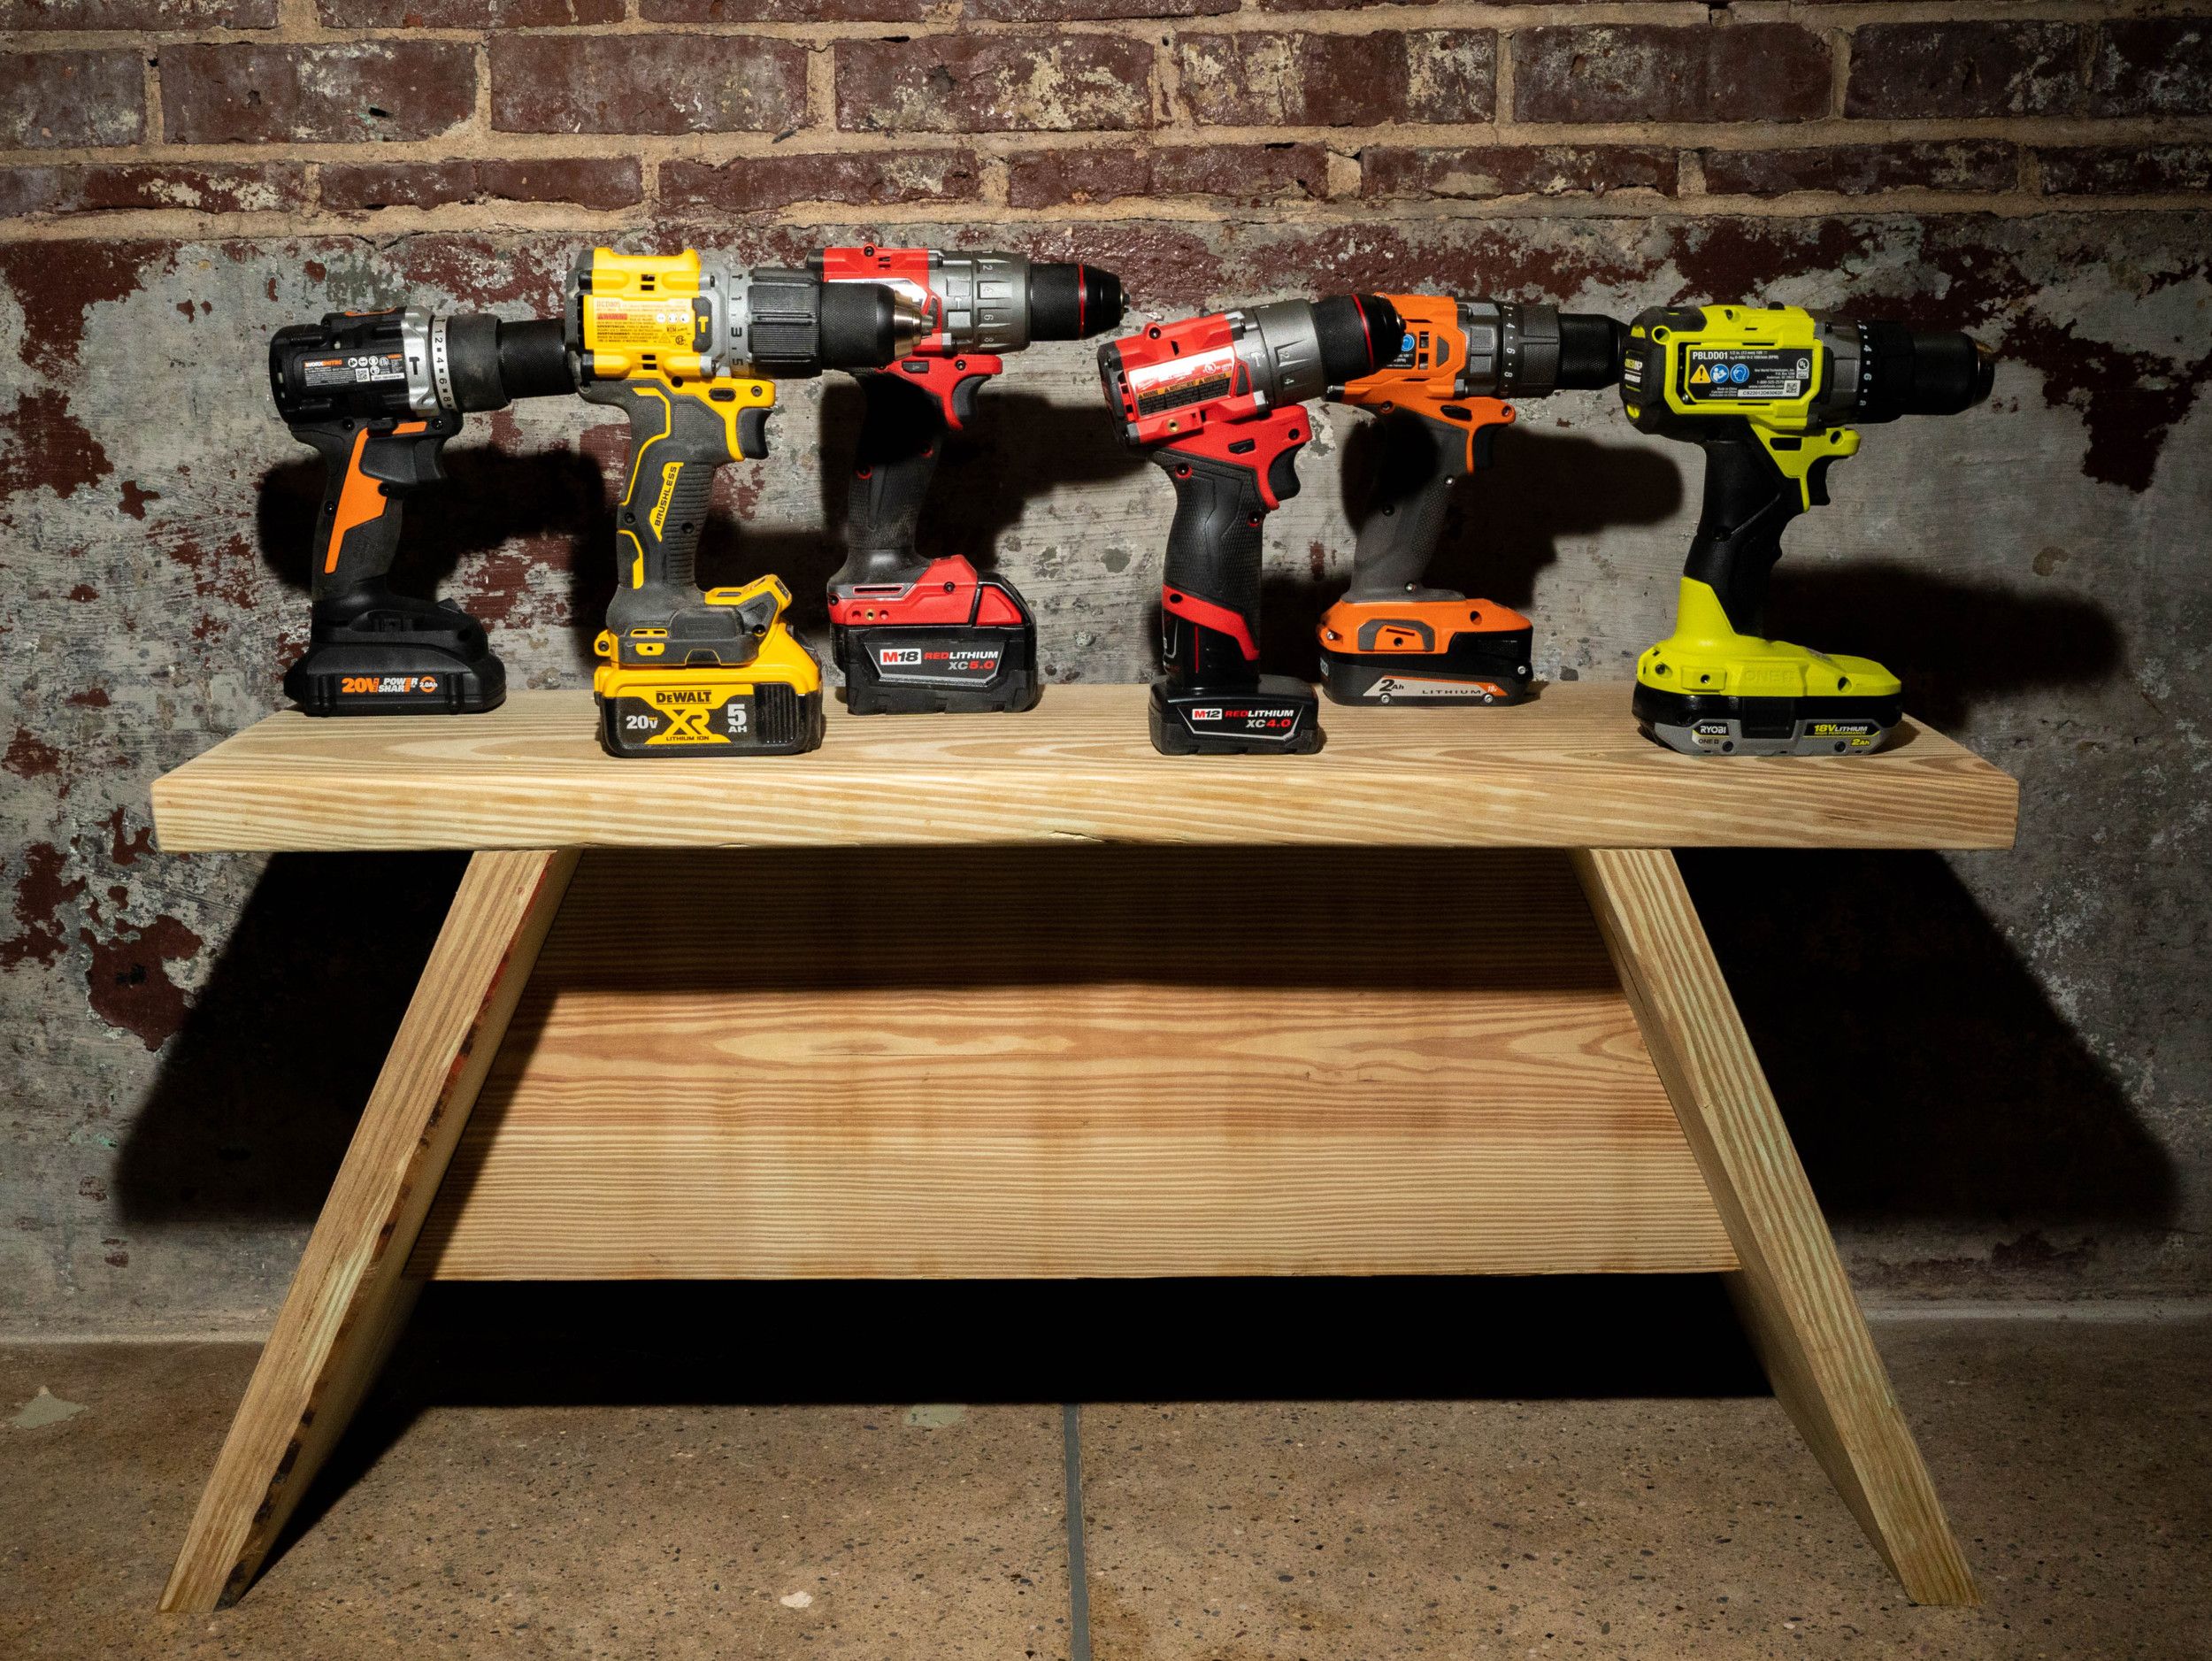 How to Select a Cordless Concrete Drill